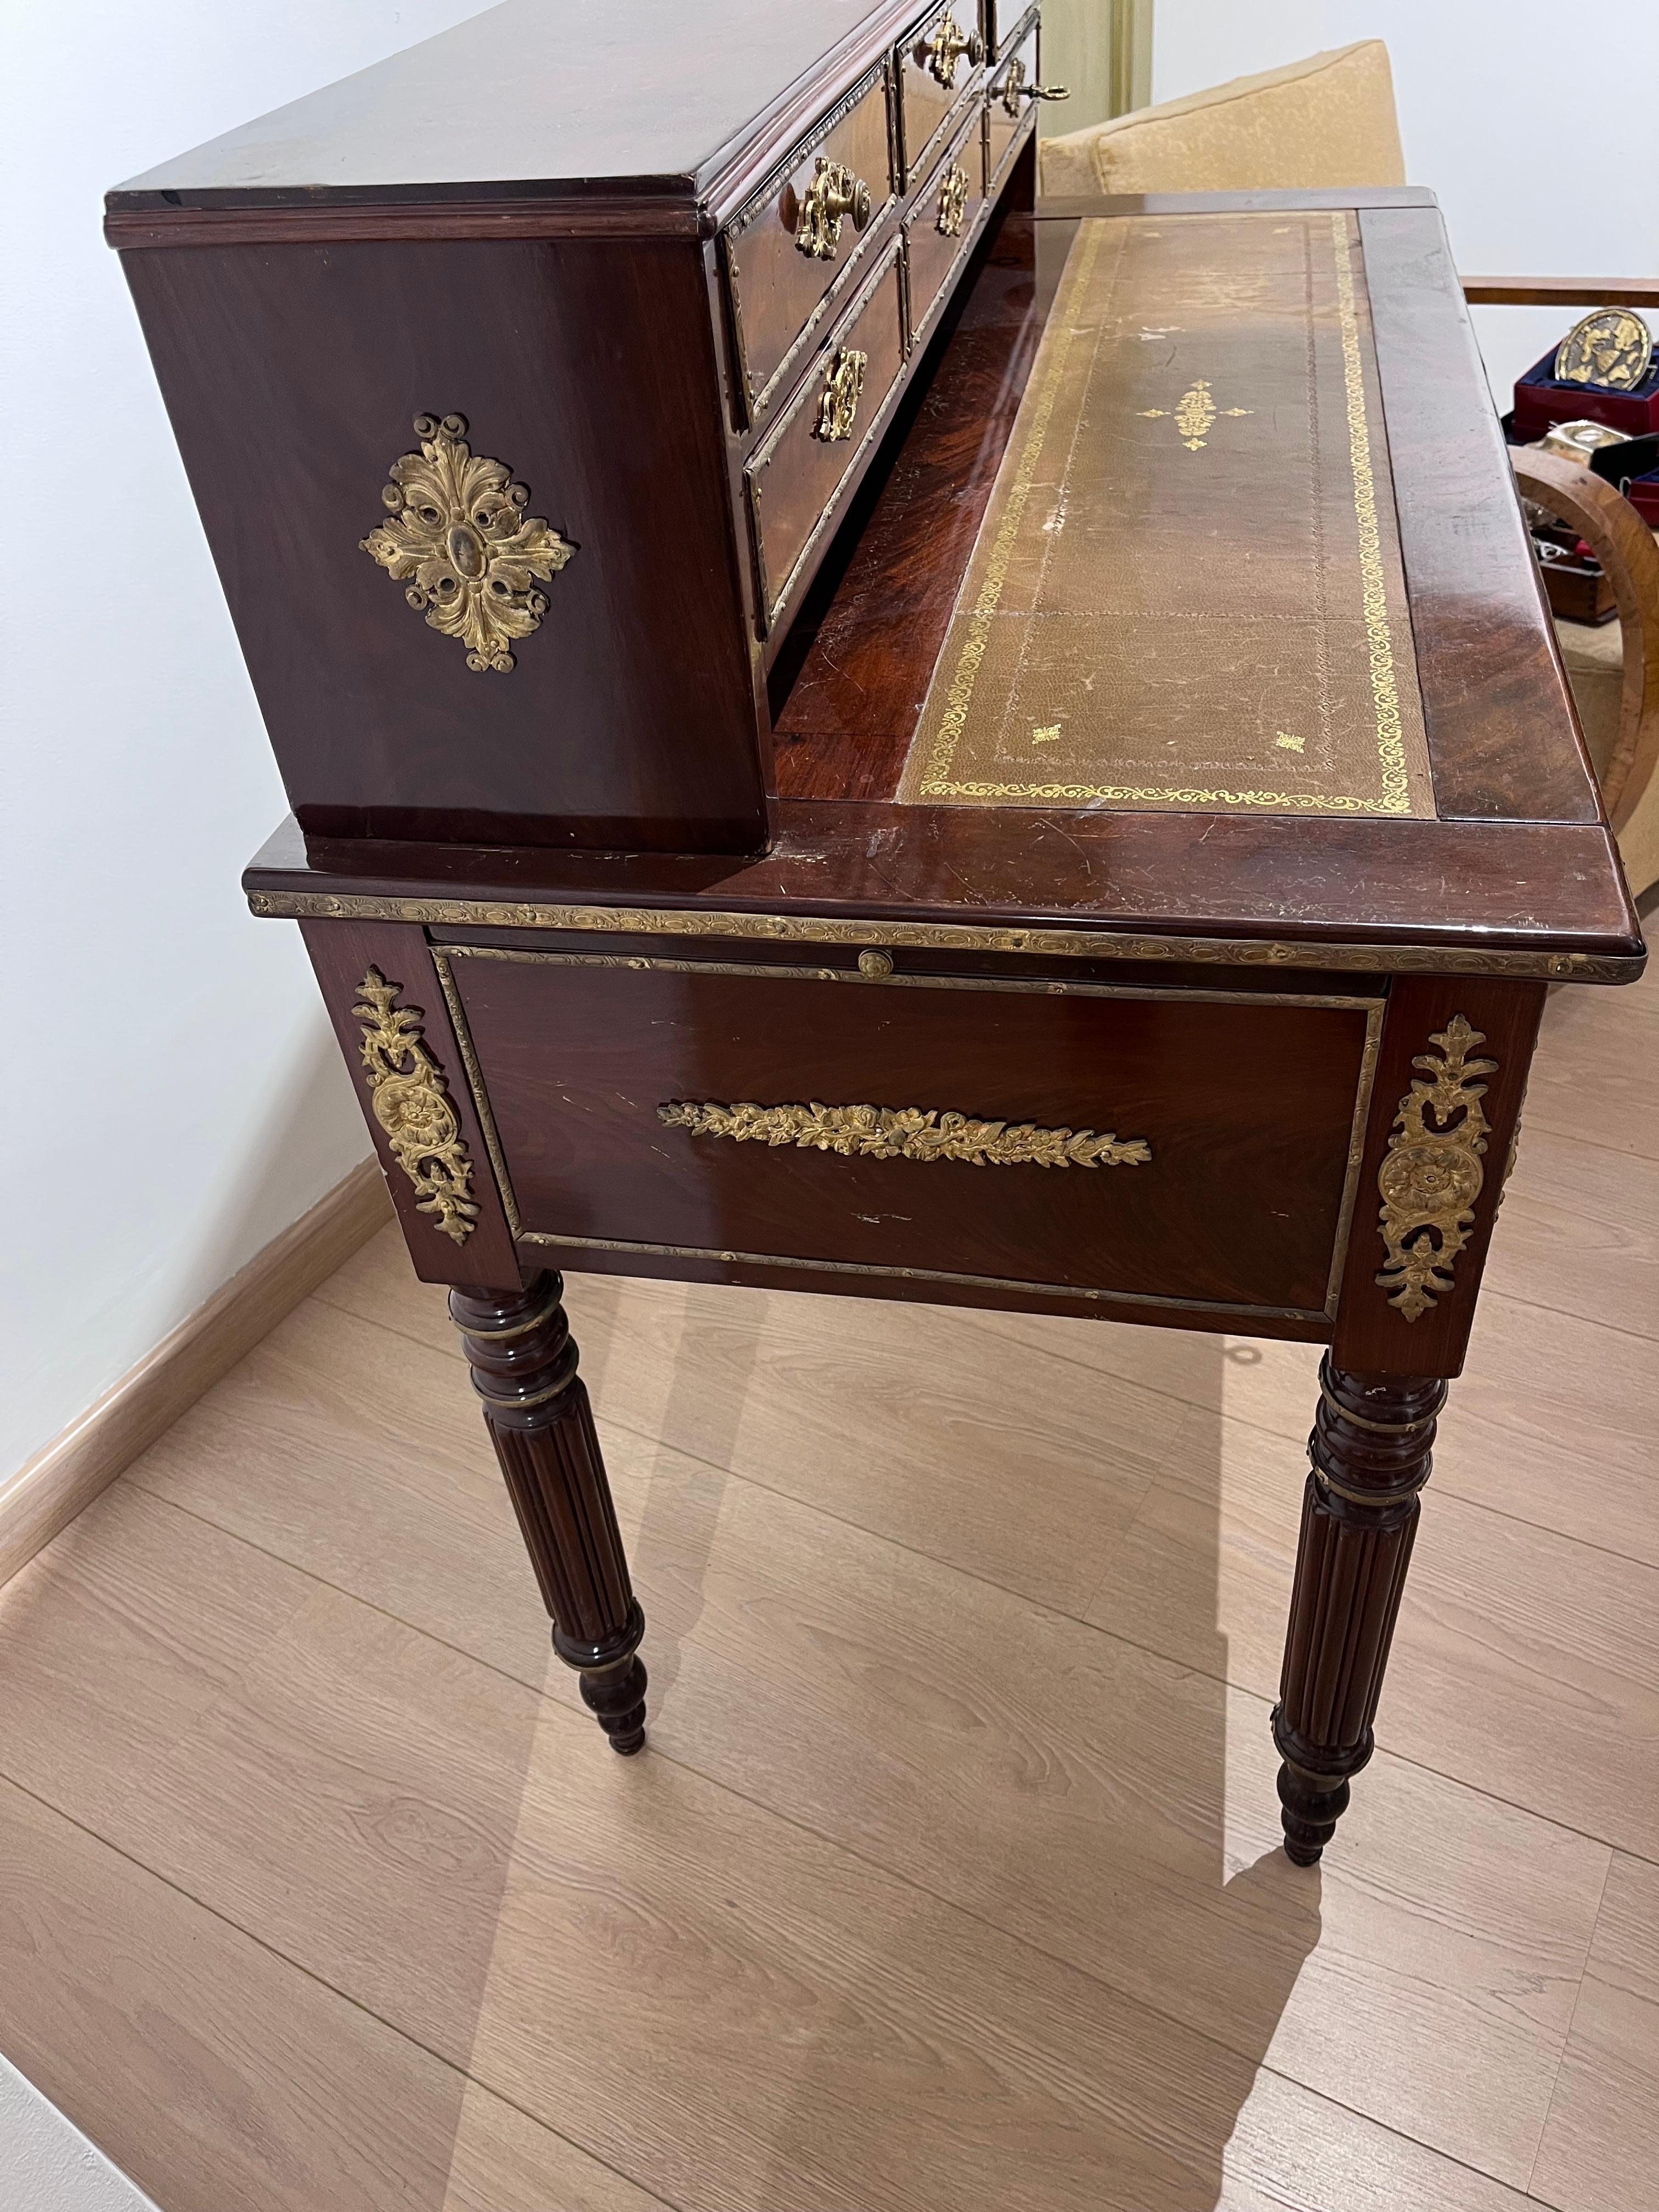 Mahogany Centrepiece Desk with Drawers France 19th Century For Sale 4